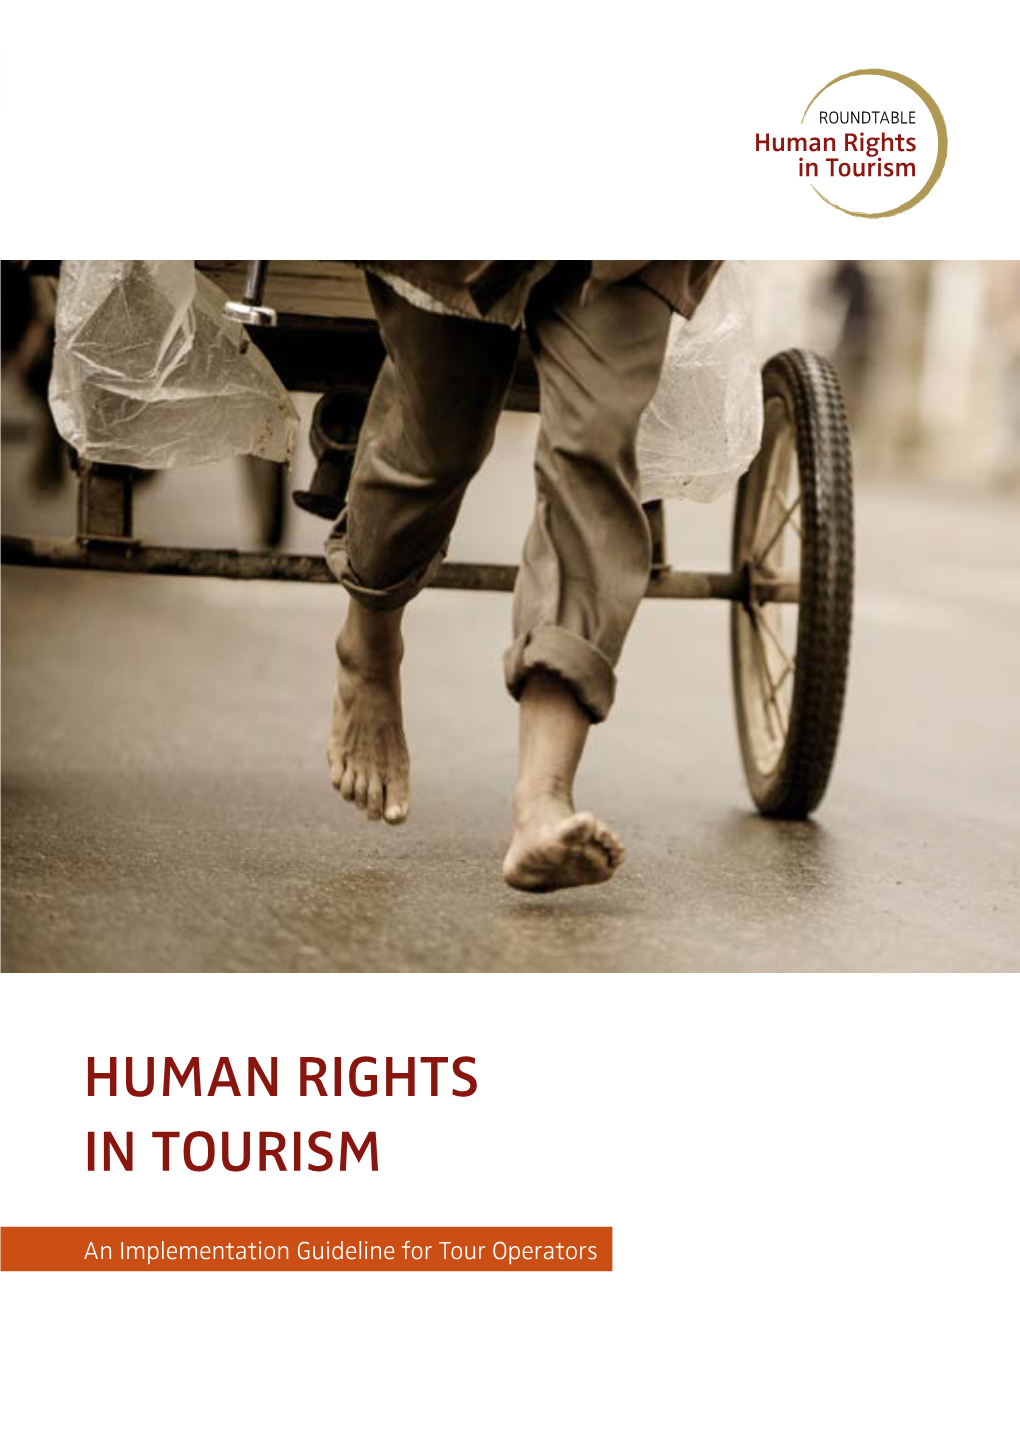 Human Rights in Tourism